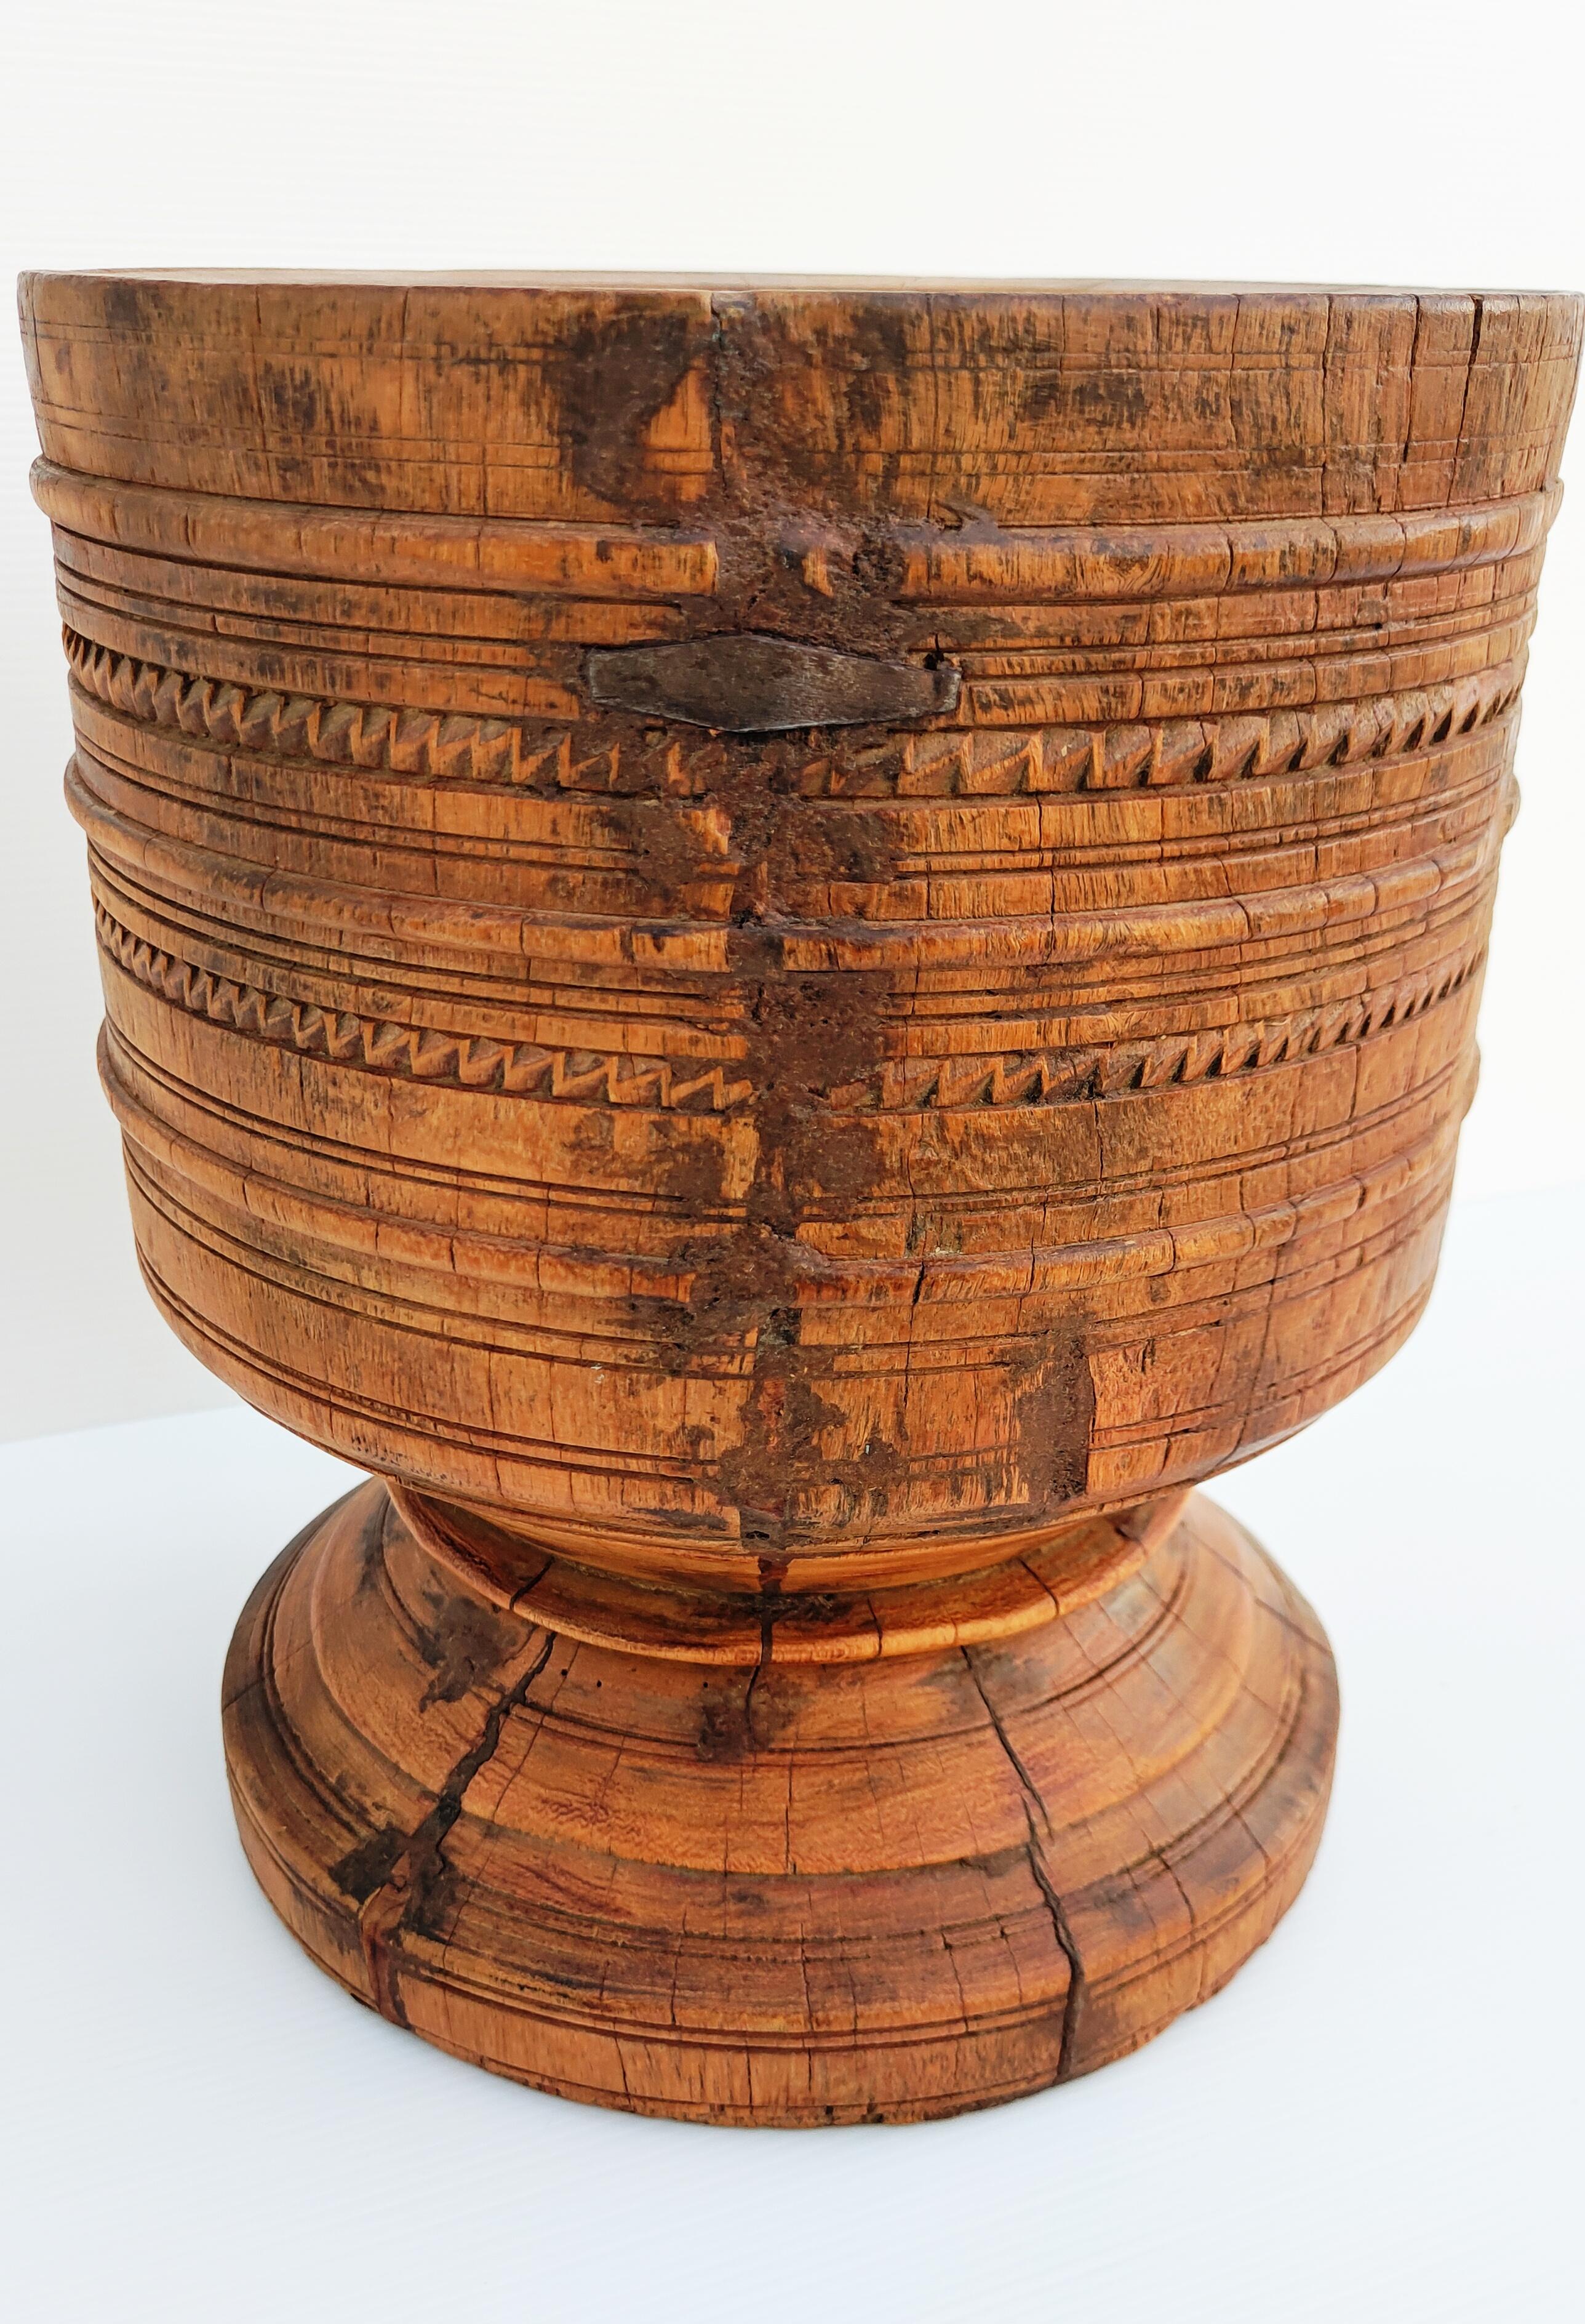 Rare and beautiful large wooden african mortar bowl manufactured in Africa in 1950s.
In very good vintage condition.